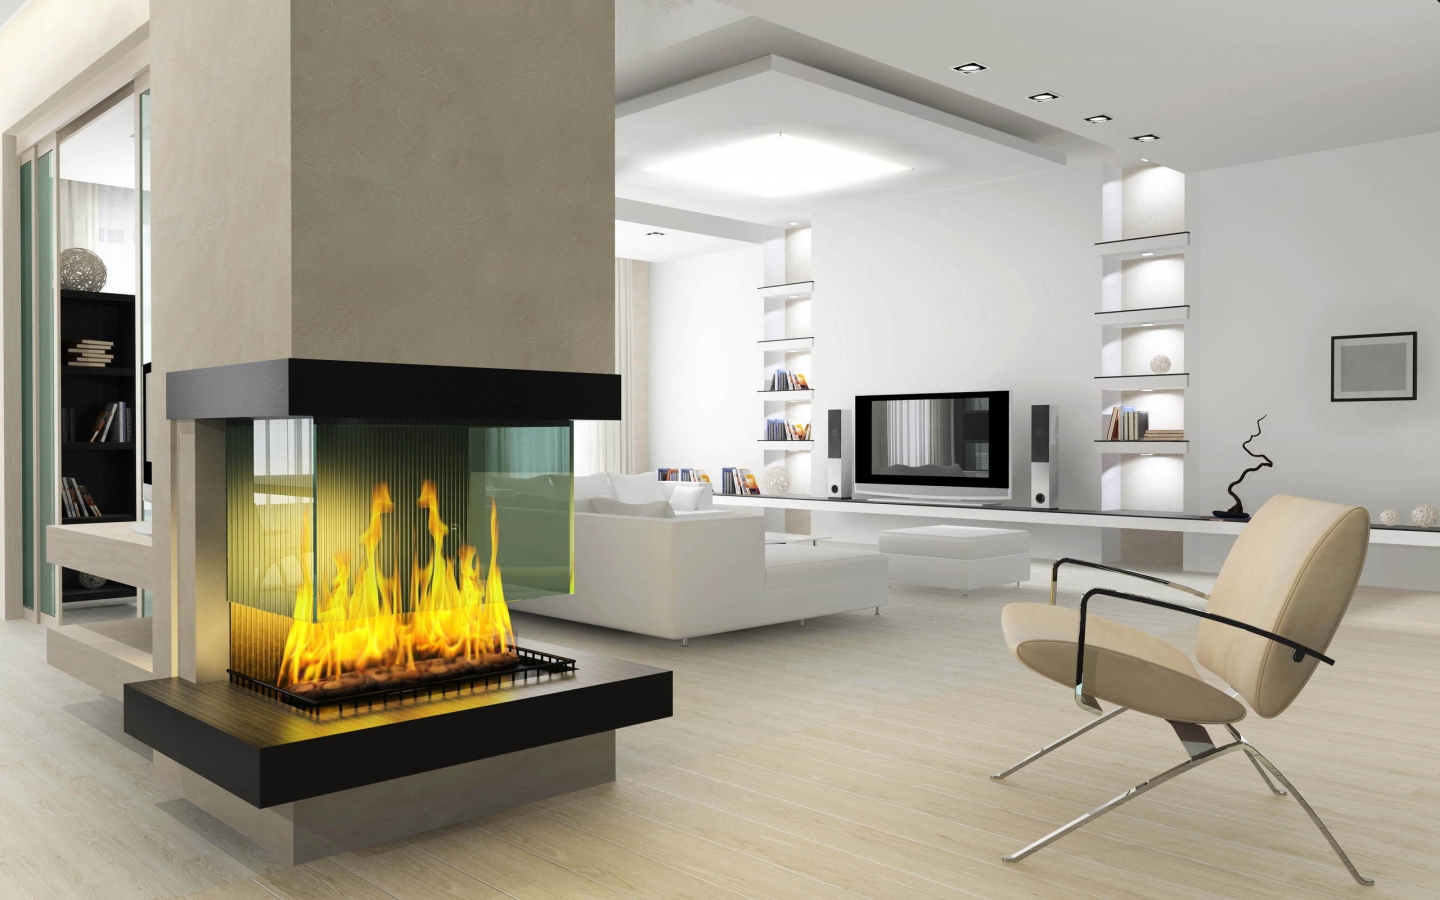 Fireplace for 1440 x 900 widescreen resolution